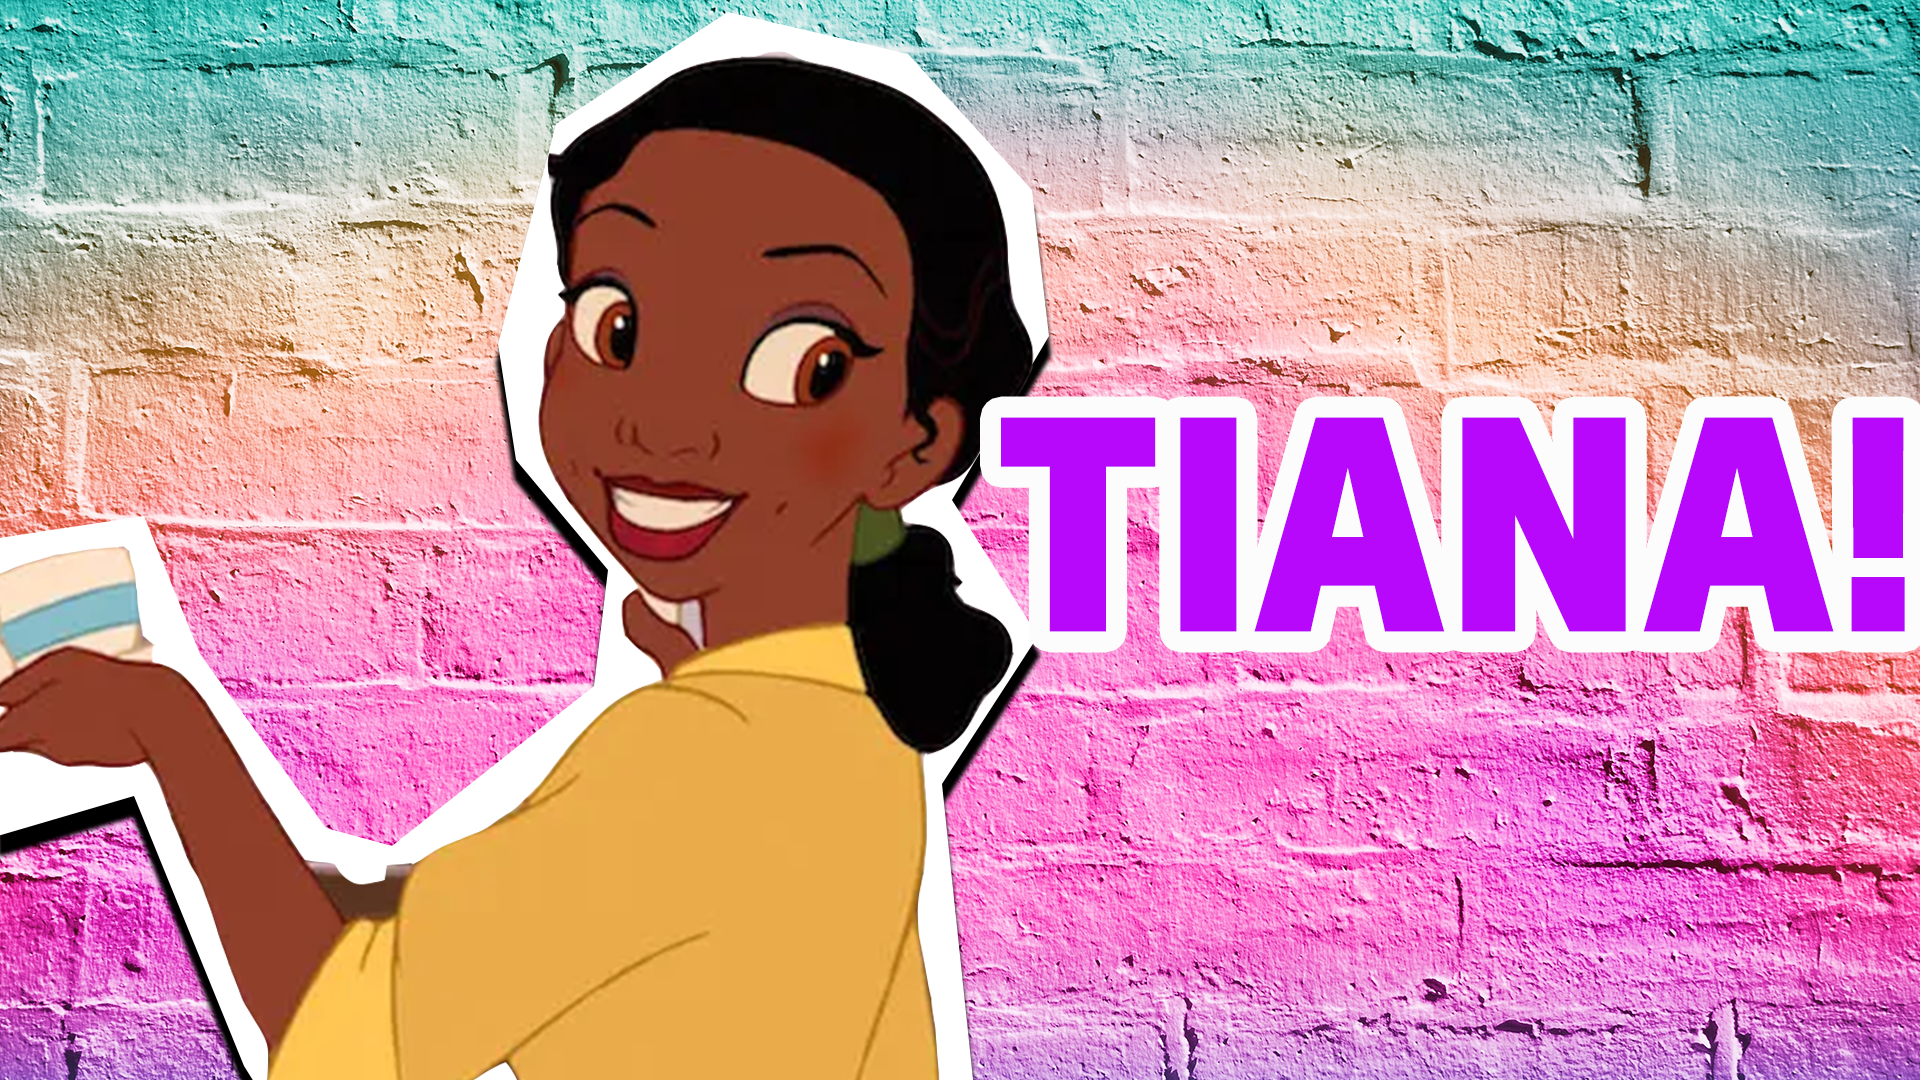 You're just like Tiana! You're super hard working and determined to make your dreams come true! Just don't forget to have fun once in a while!